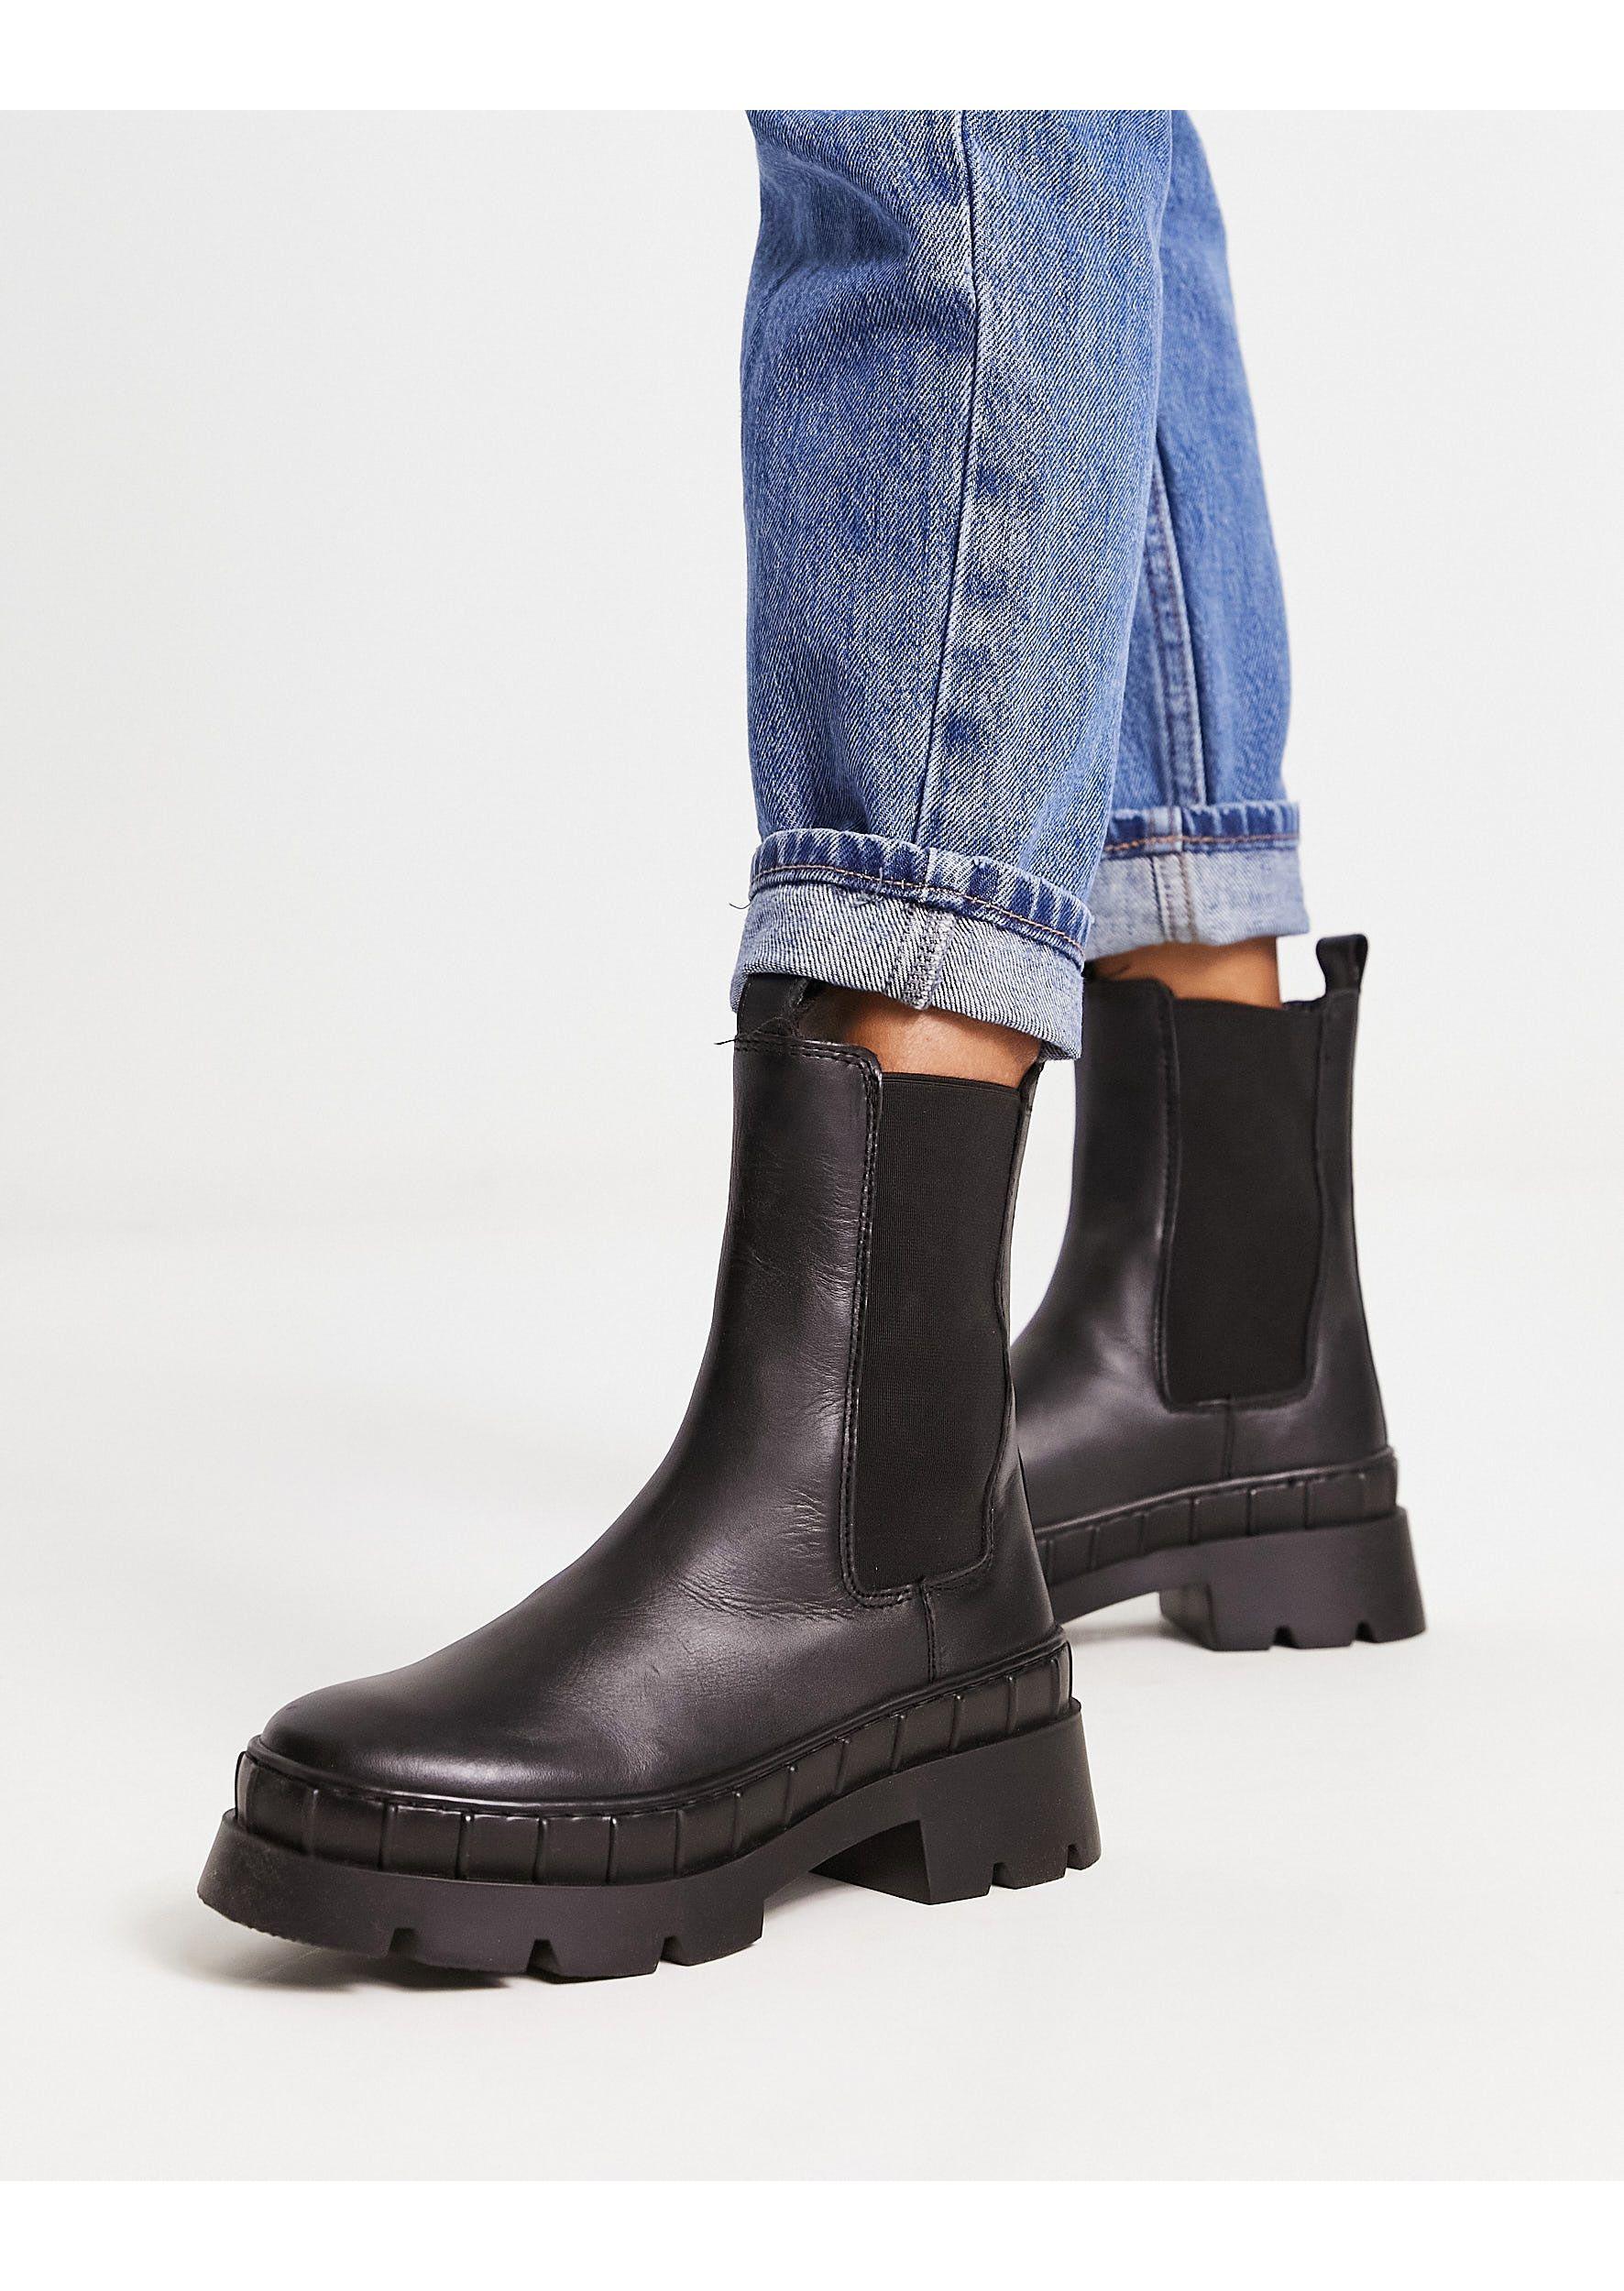 Steve Madden Barclay Chunky Ankle Boots in Blue | Lyst